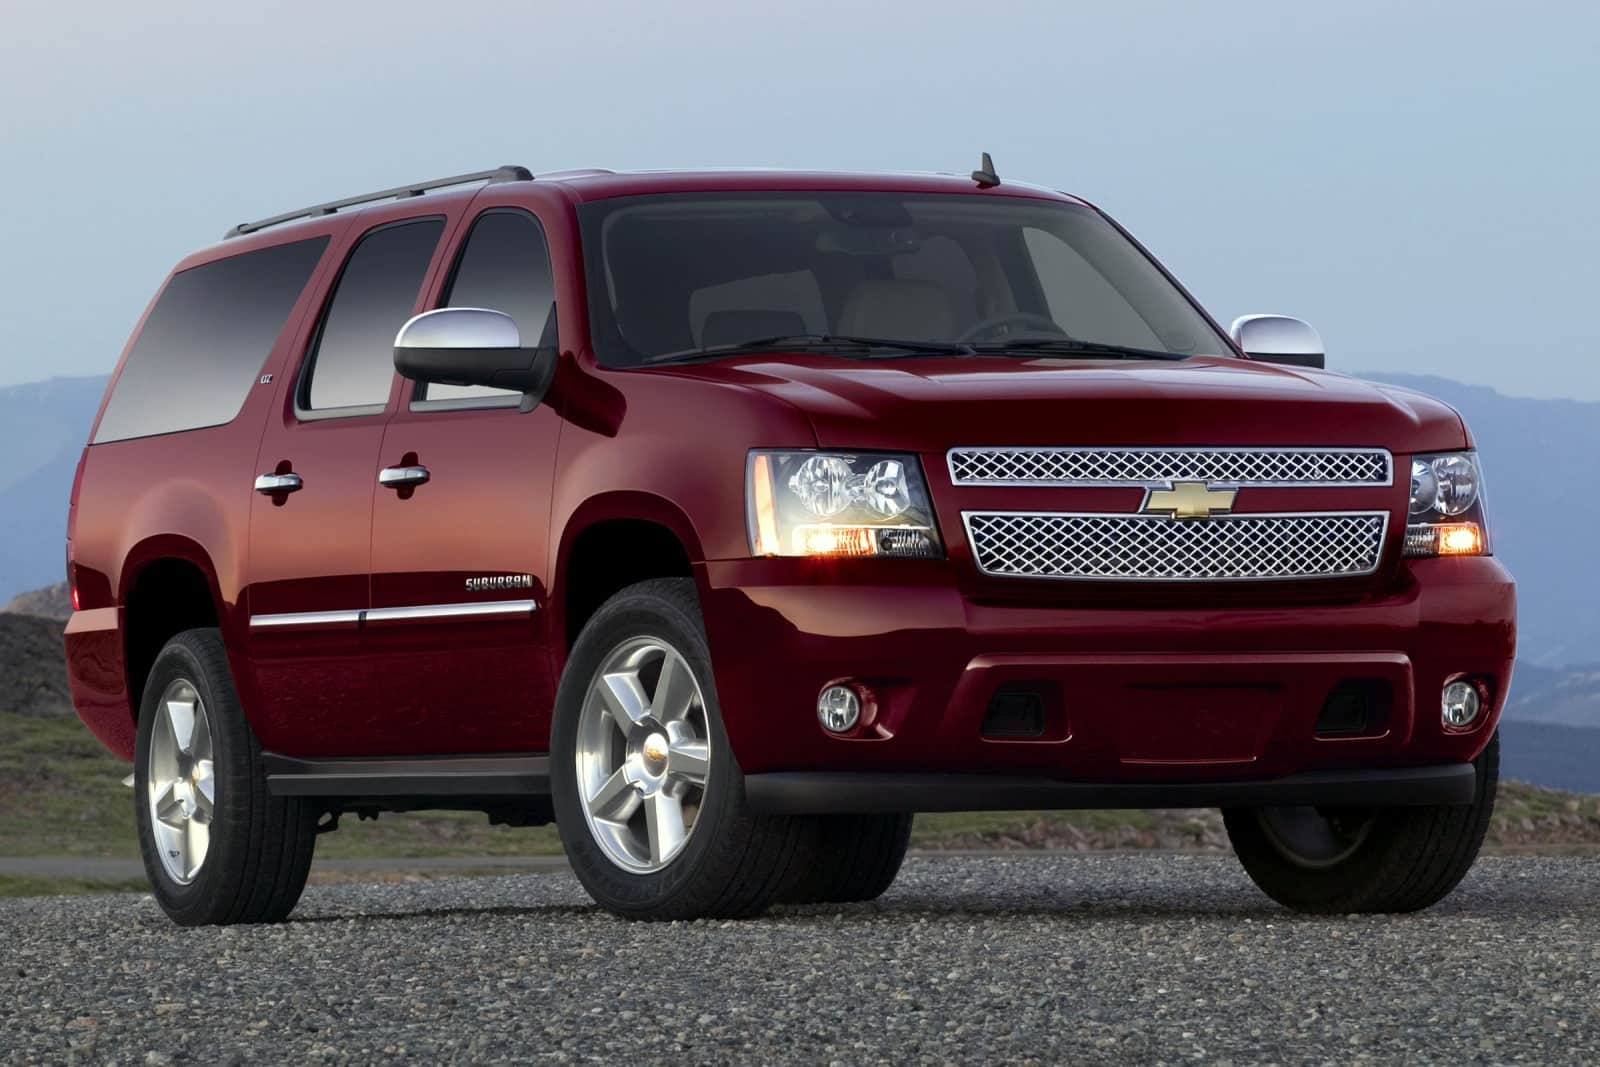 How Much Does A Chevy Suburban Weigh?